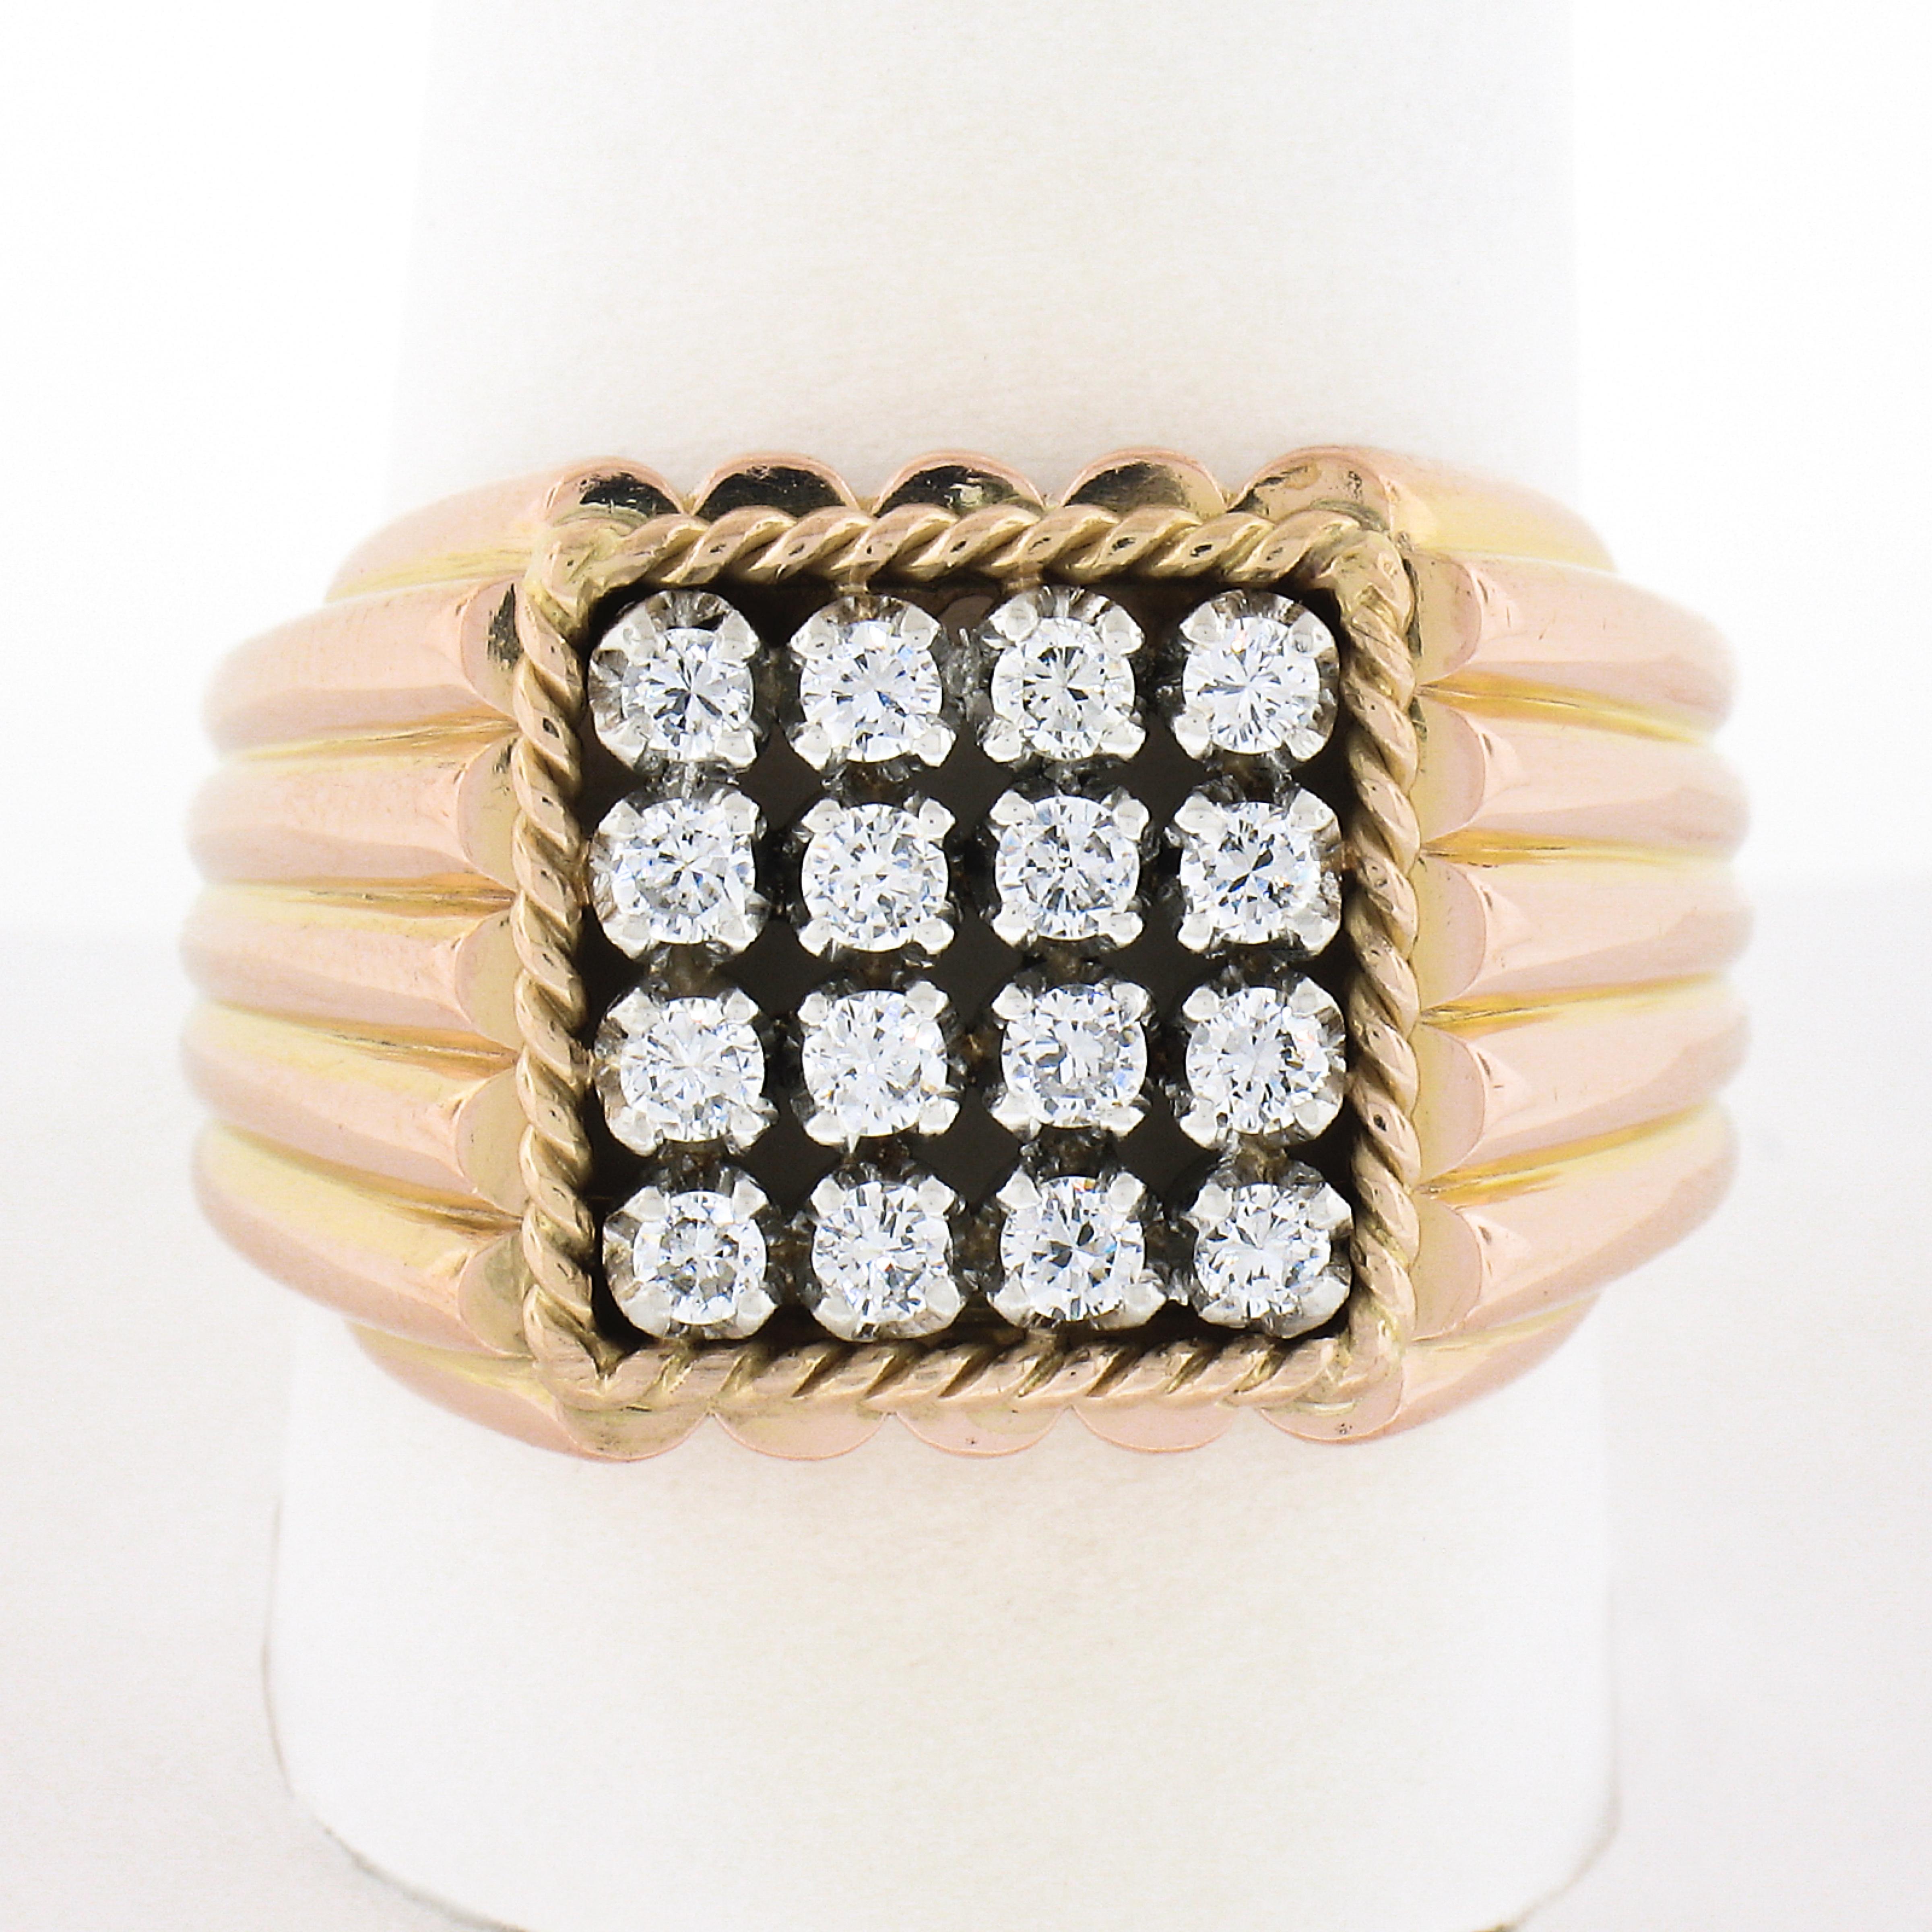 This outstanding and very well made men's vintage ring is crafted in solid 18k gold and features a wide squared shaped top drenched with 16 very fine quality diamonds throughout. The diamonds are round brilliant cut and individually prong set in